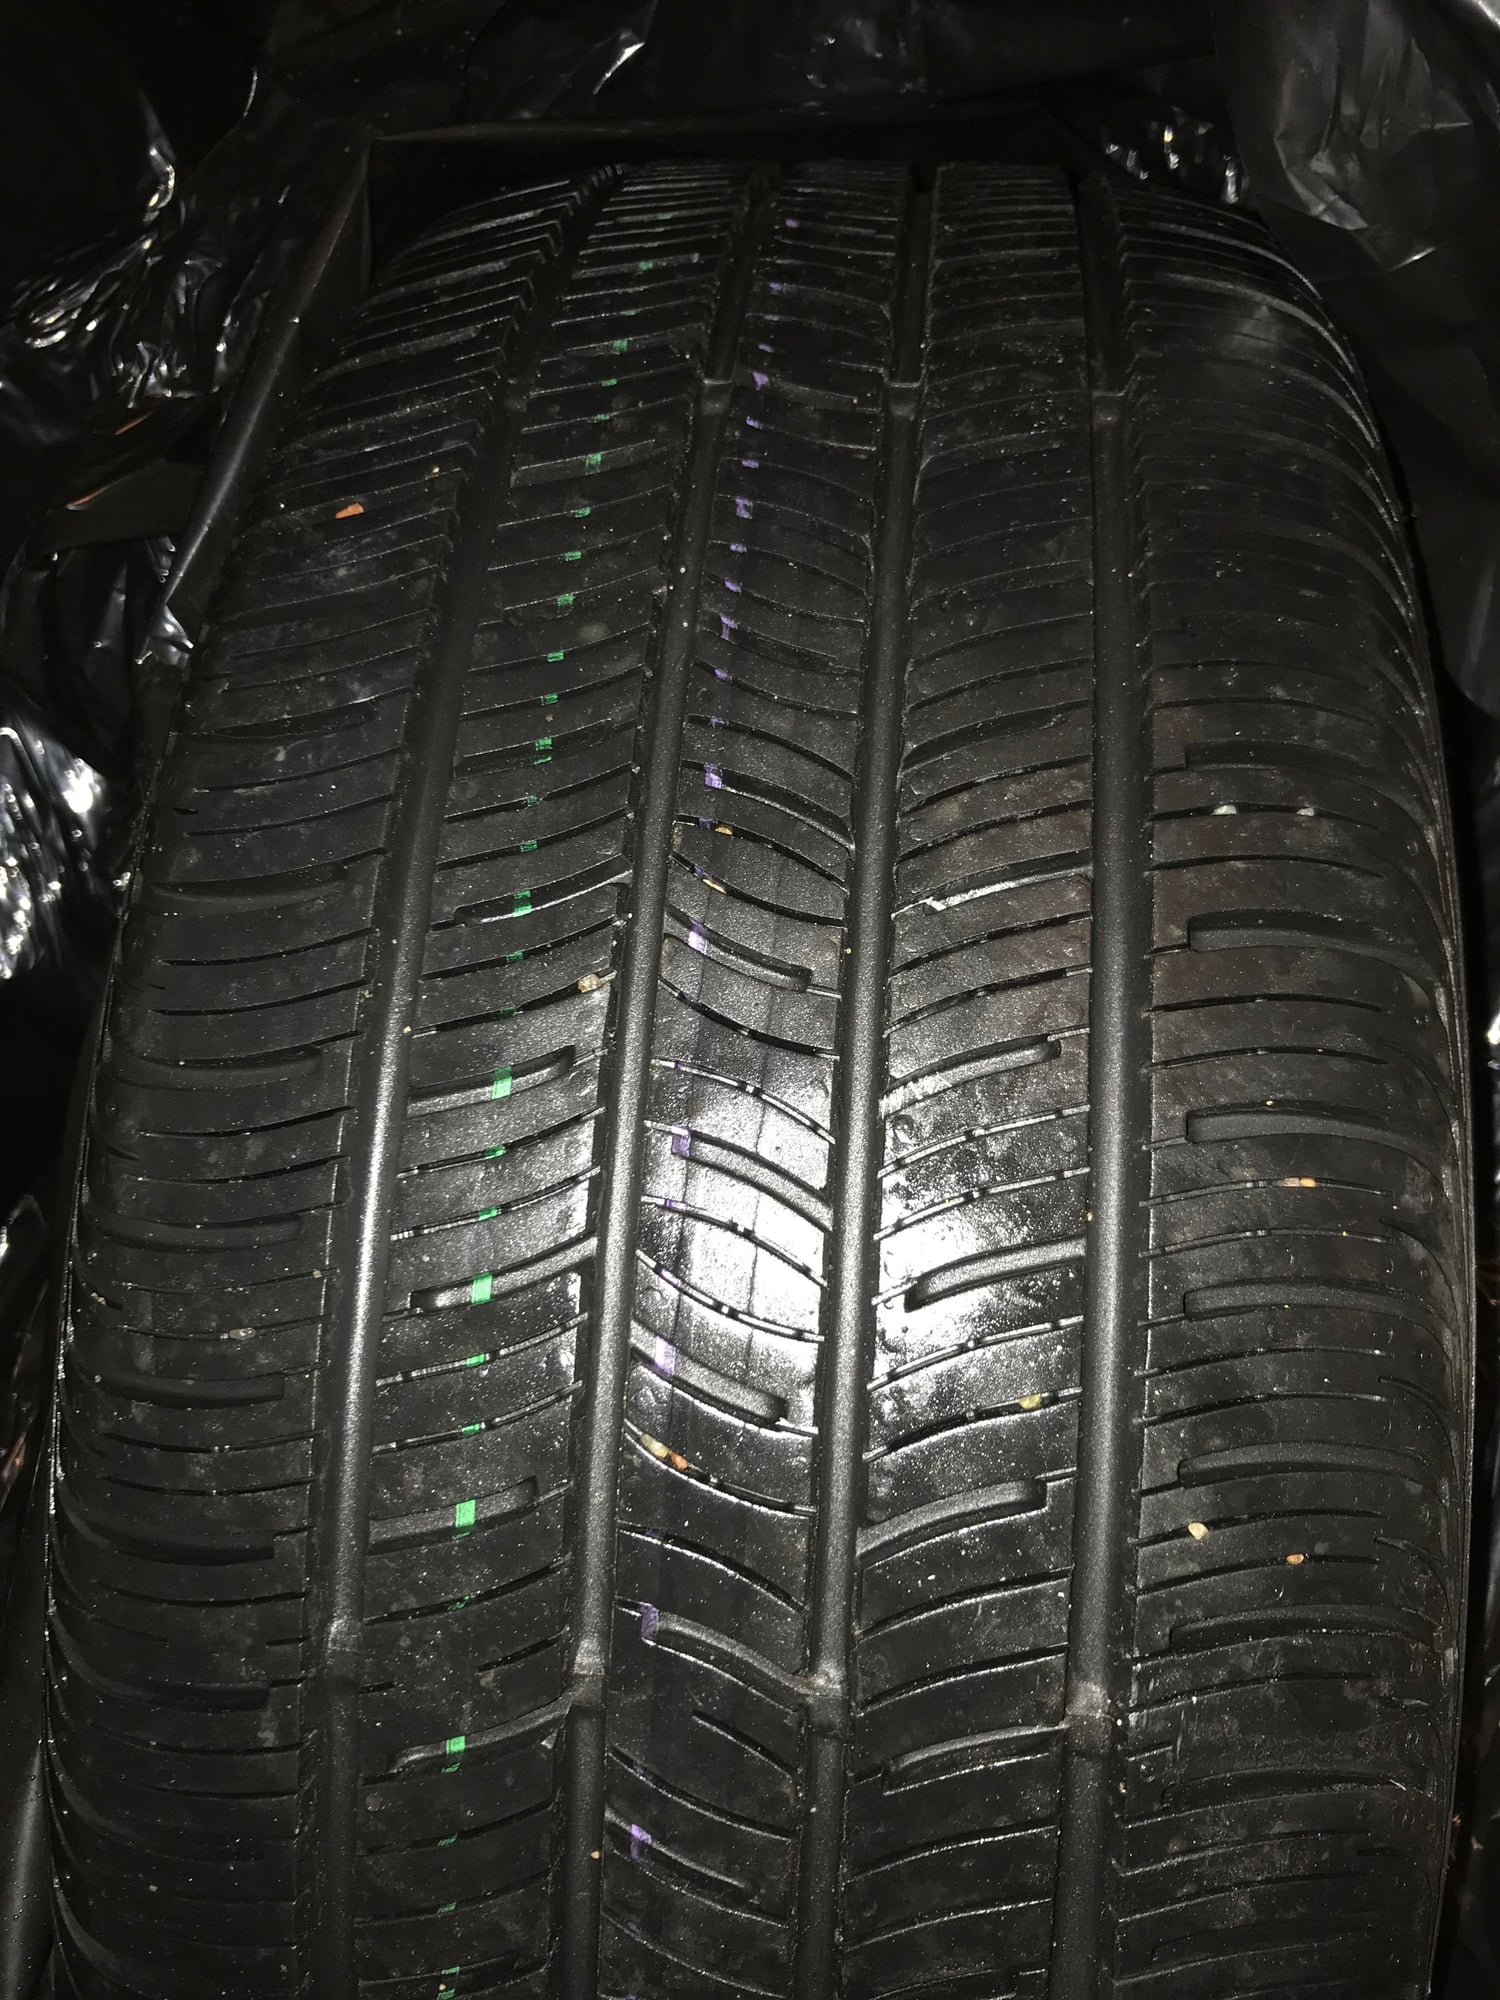 Wheels and Tires/Axles - 4 Continental Pro Contact 225/50R17 *Like NEW * - $375 - Used - All Years Mercedes-Benz C300 - Boulder, CO 80304, United States